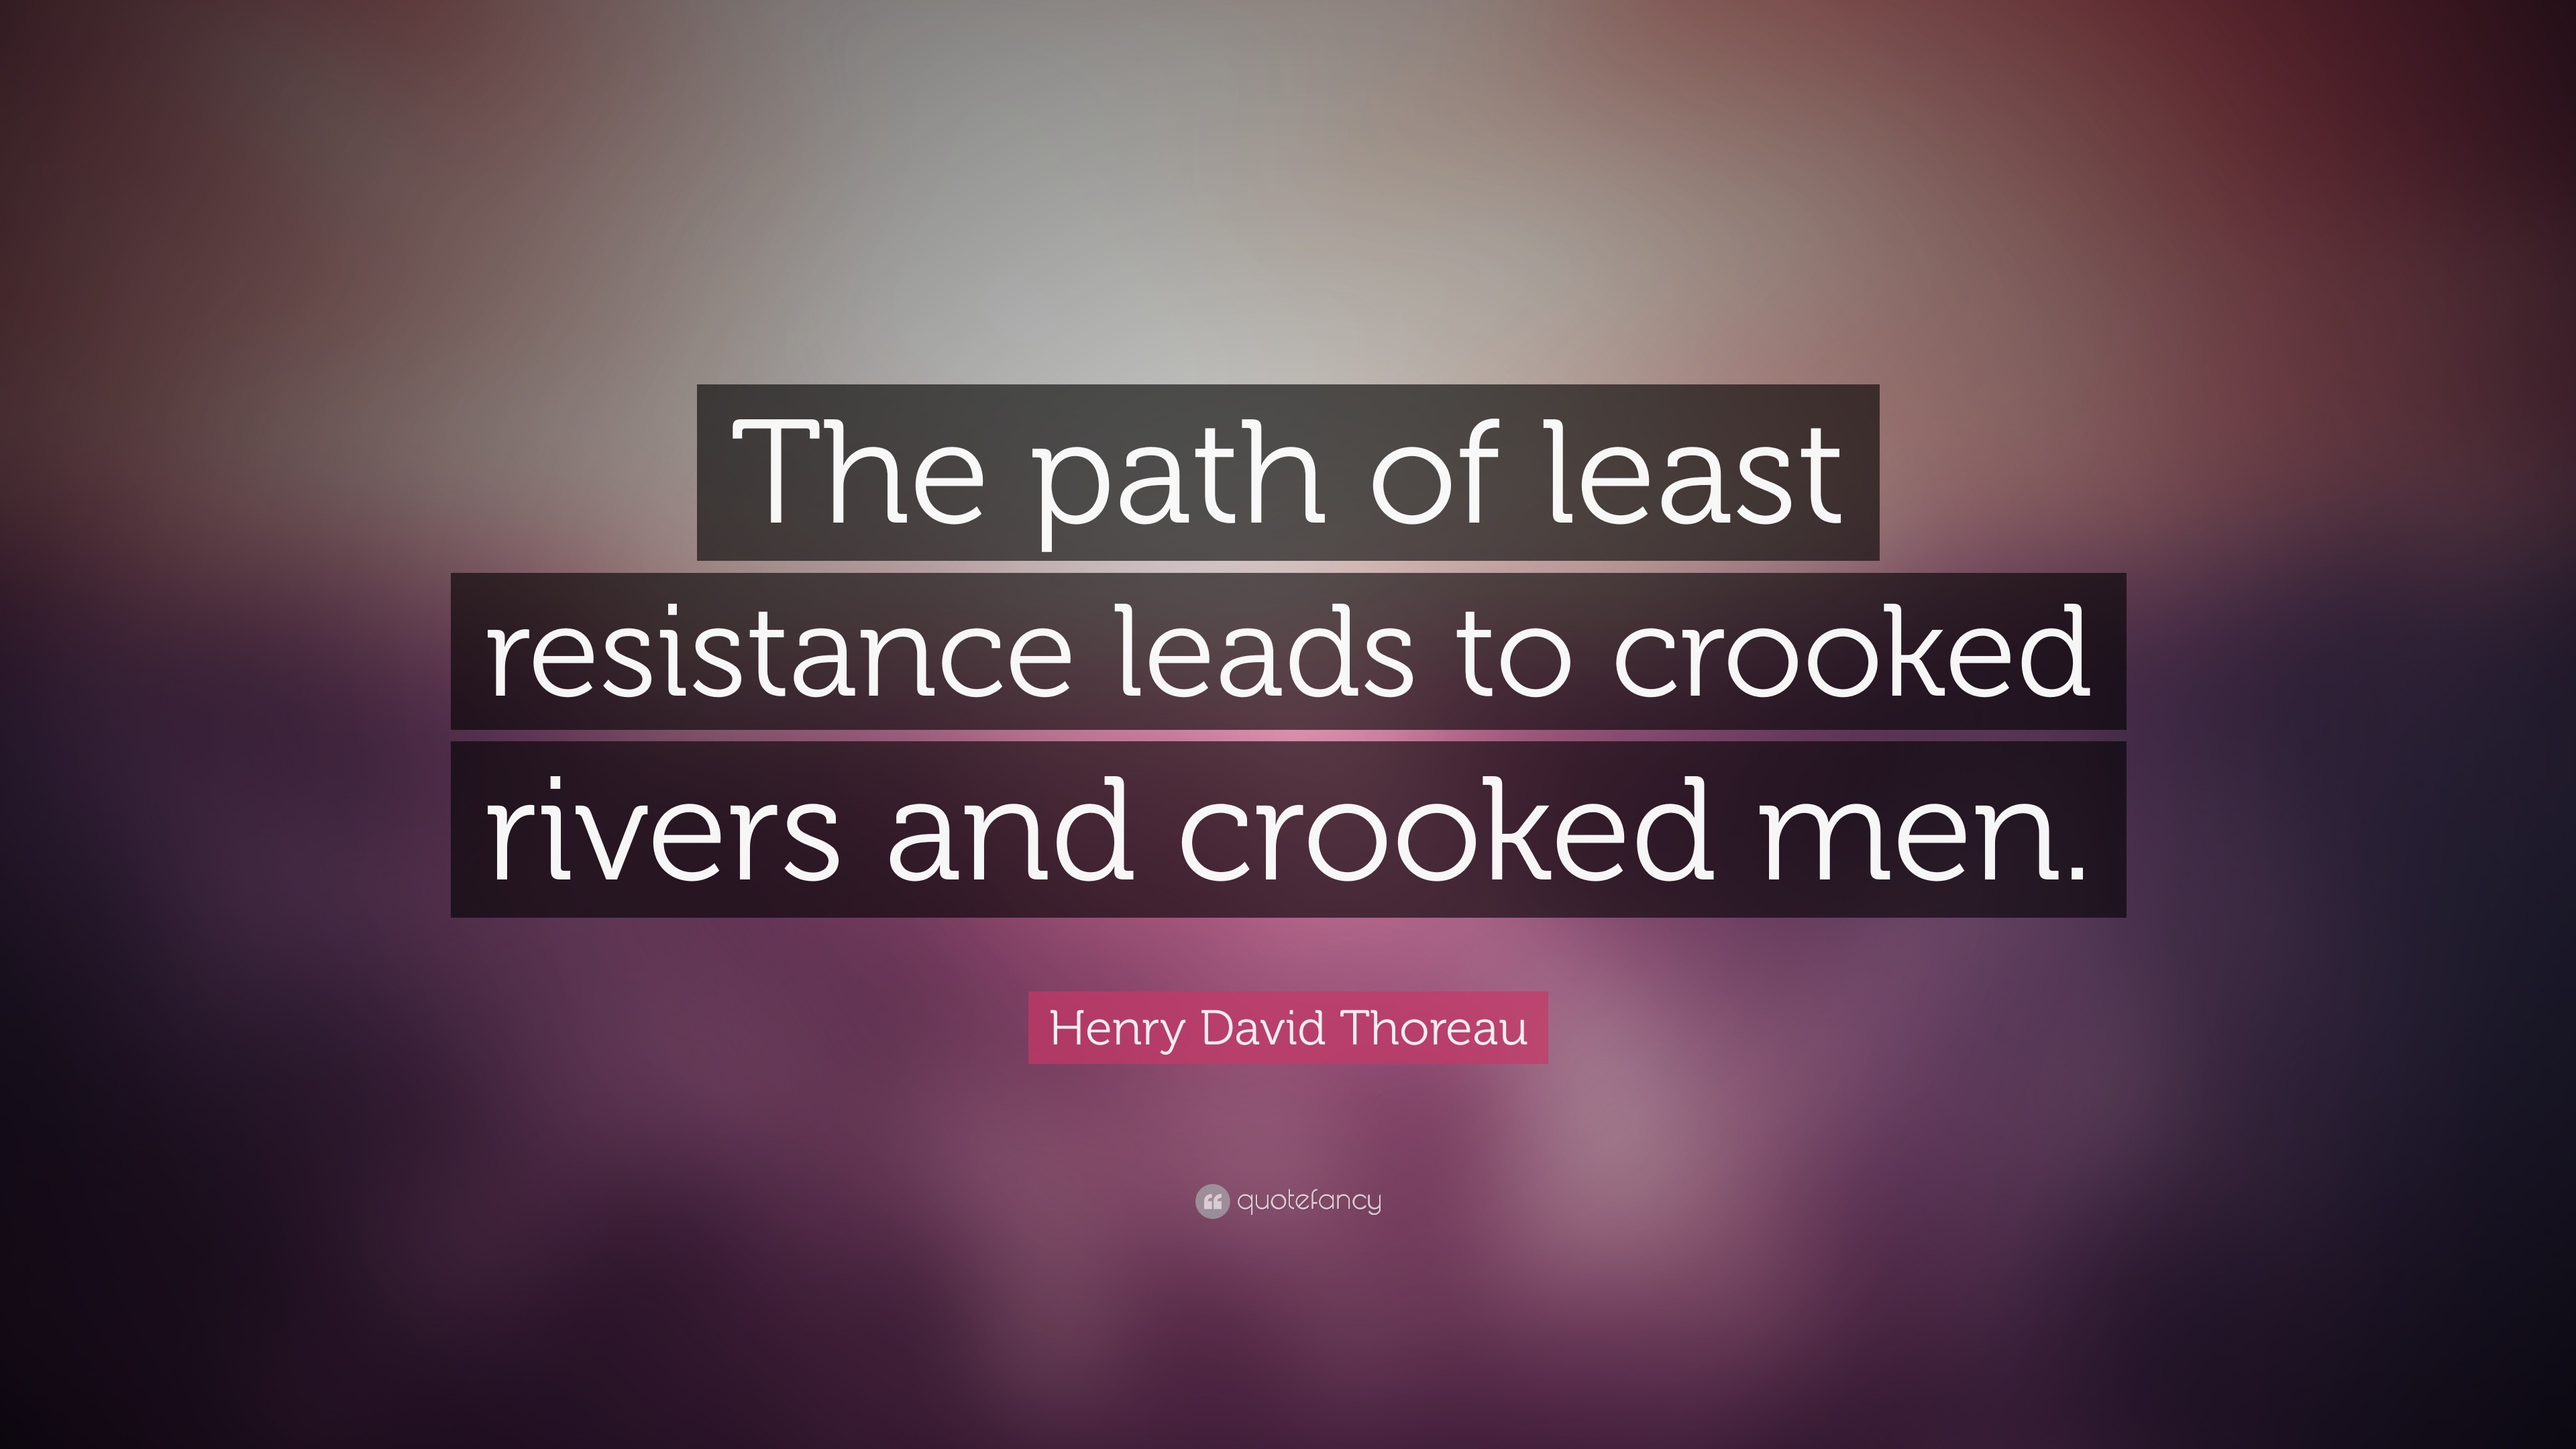 Henry David Thoreau Quote: “The path of least resistance leads to